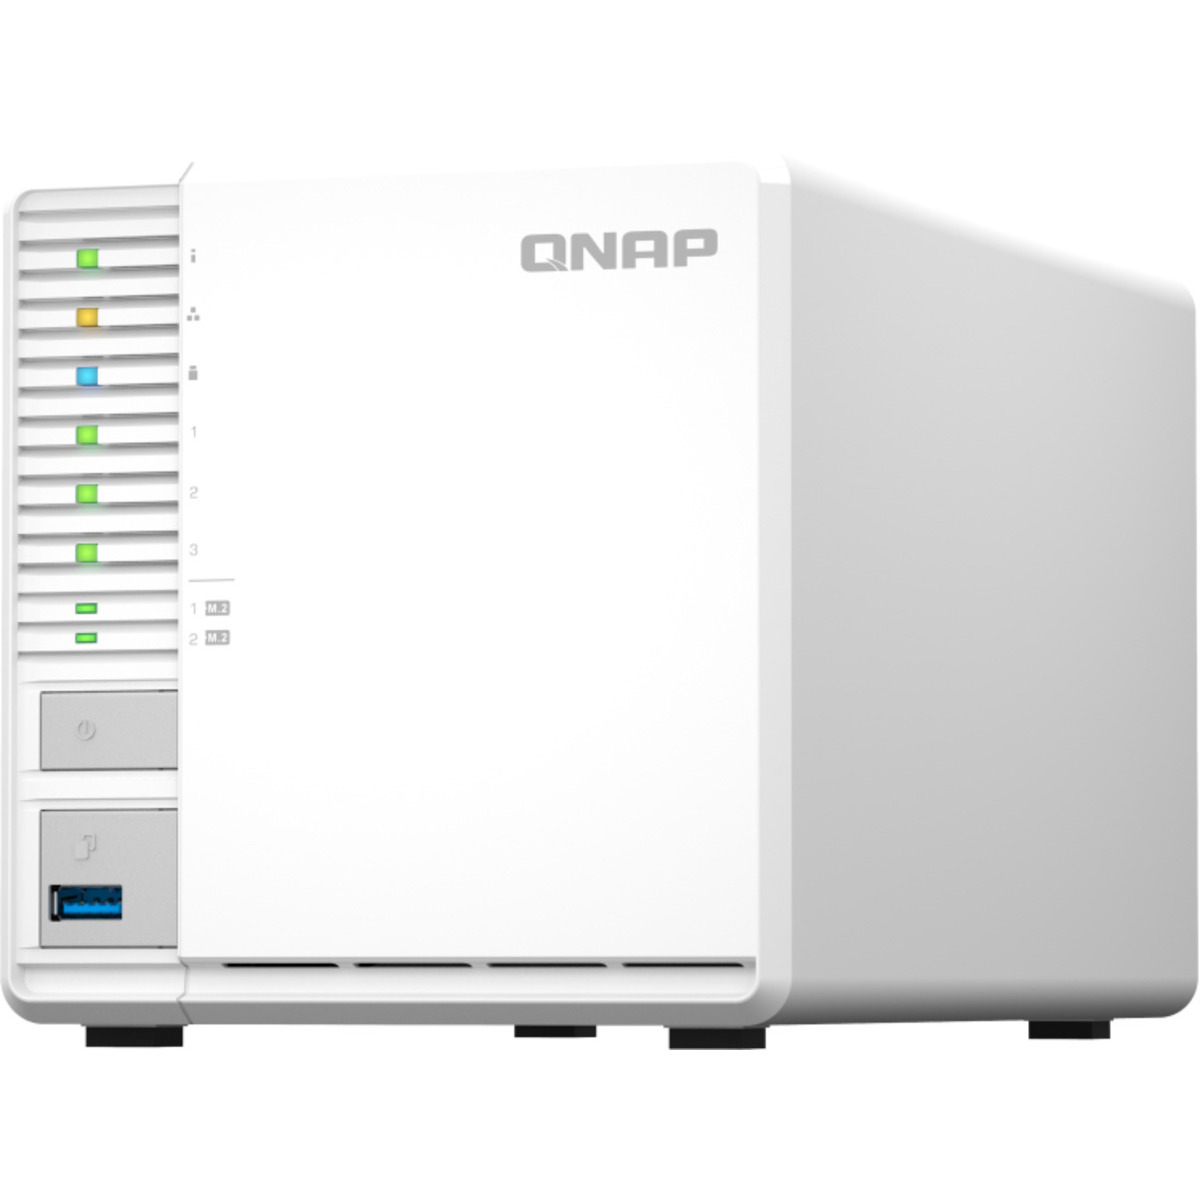 buy QNAP TS-364 18tb Desktop NAS - Network Attached Storage Device 3x6000gb Western Digital Red WD60EFAX 3.5 5400rpm SATA 6Gb/s HDD NAS Class Drives Installed - Burn-In Tested - ON SALE - nas headquarters buy network attached storage server device das new raid-5 free shipping simply usa TS-364